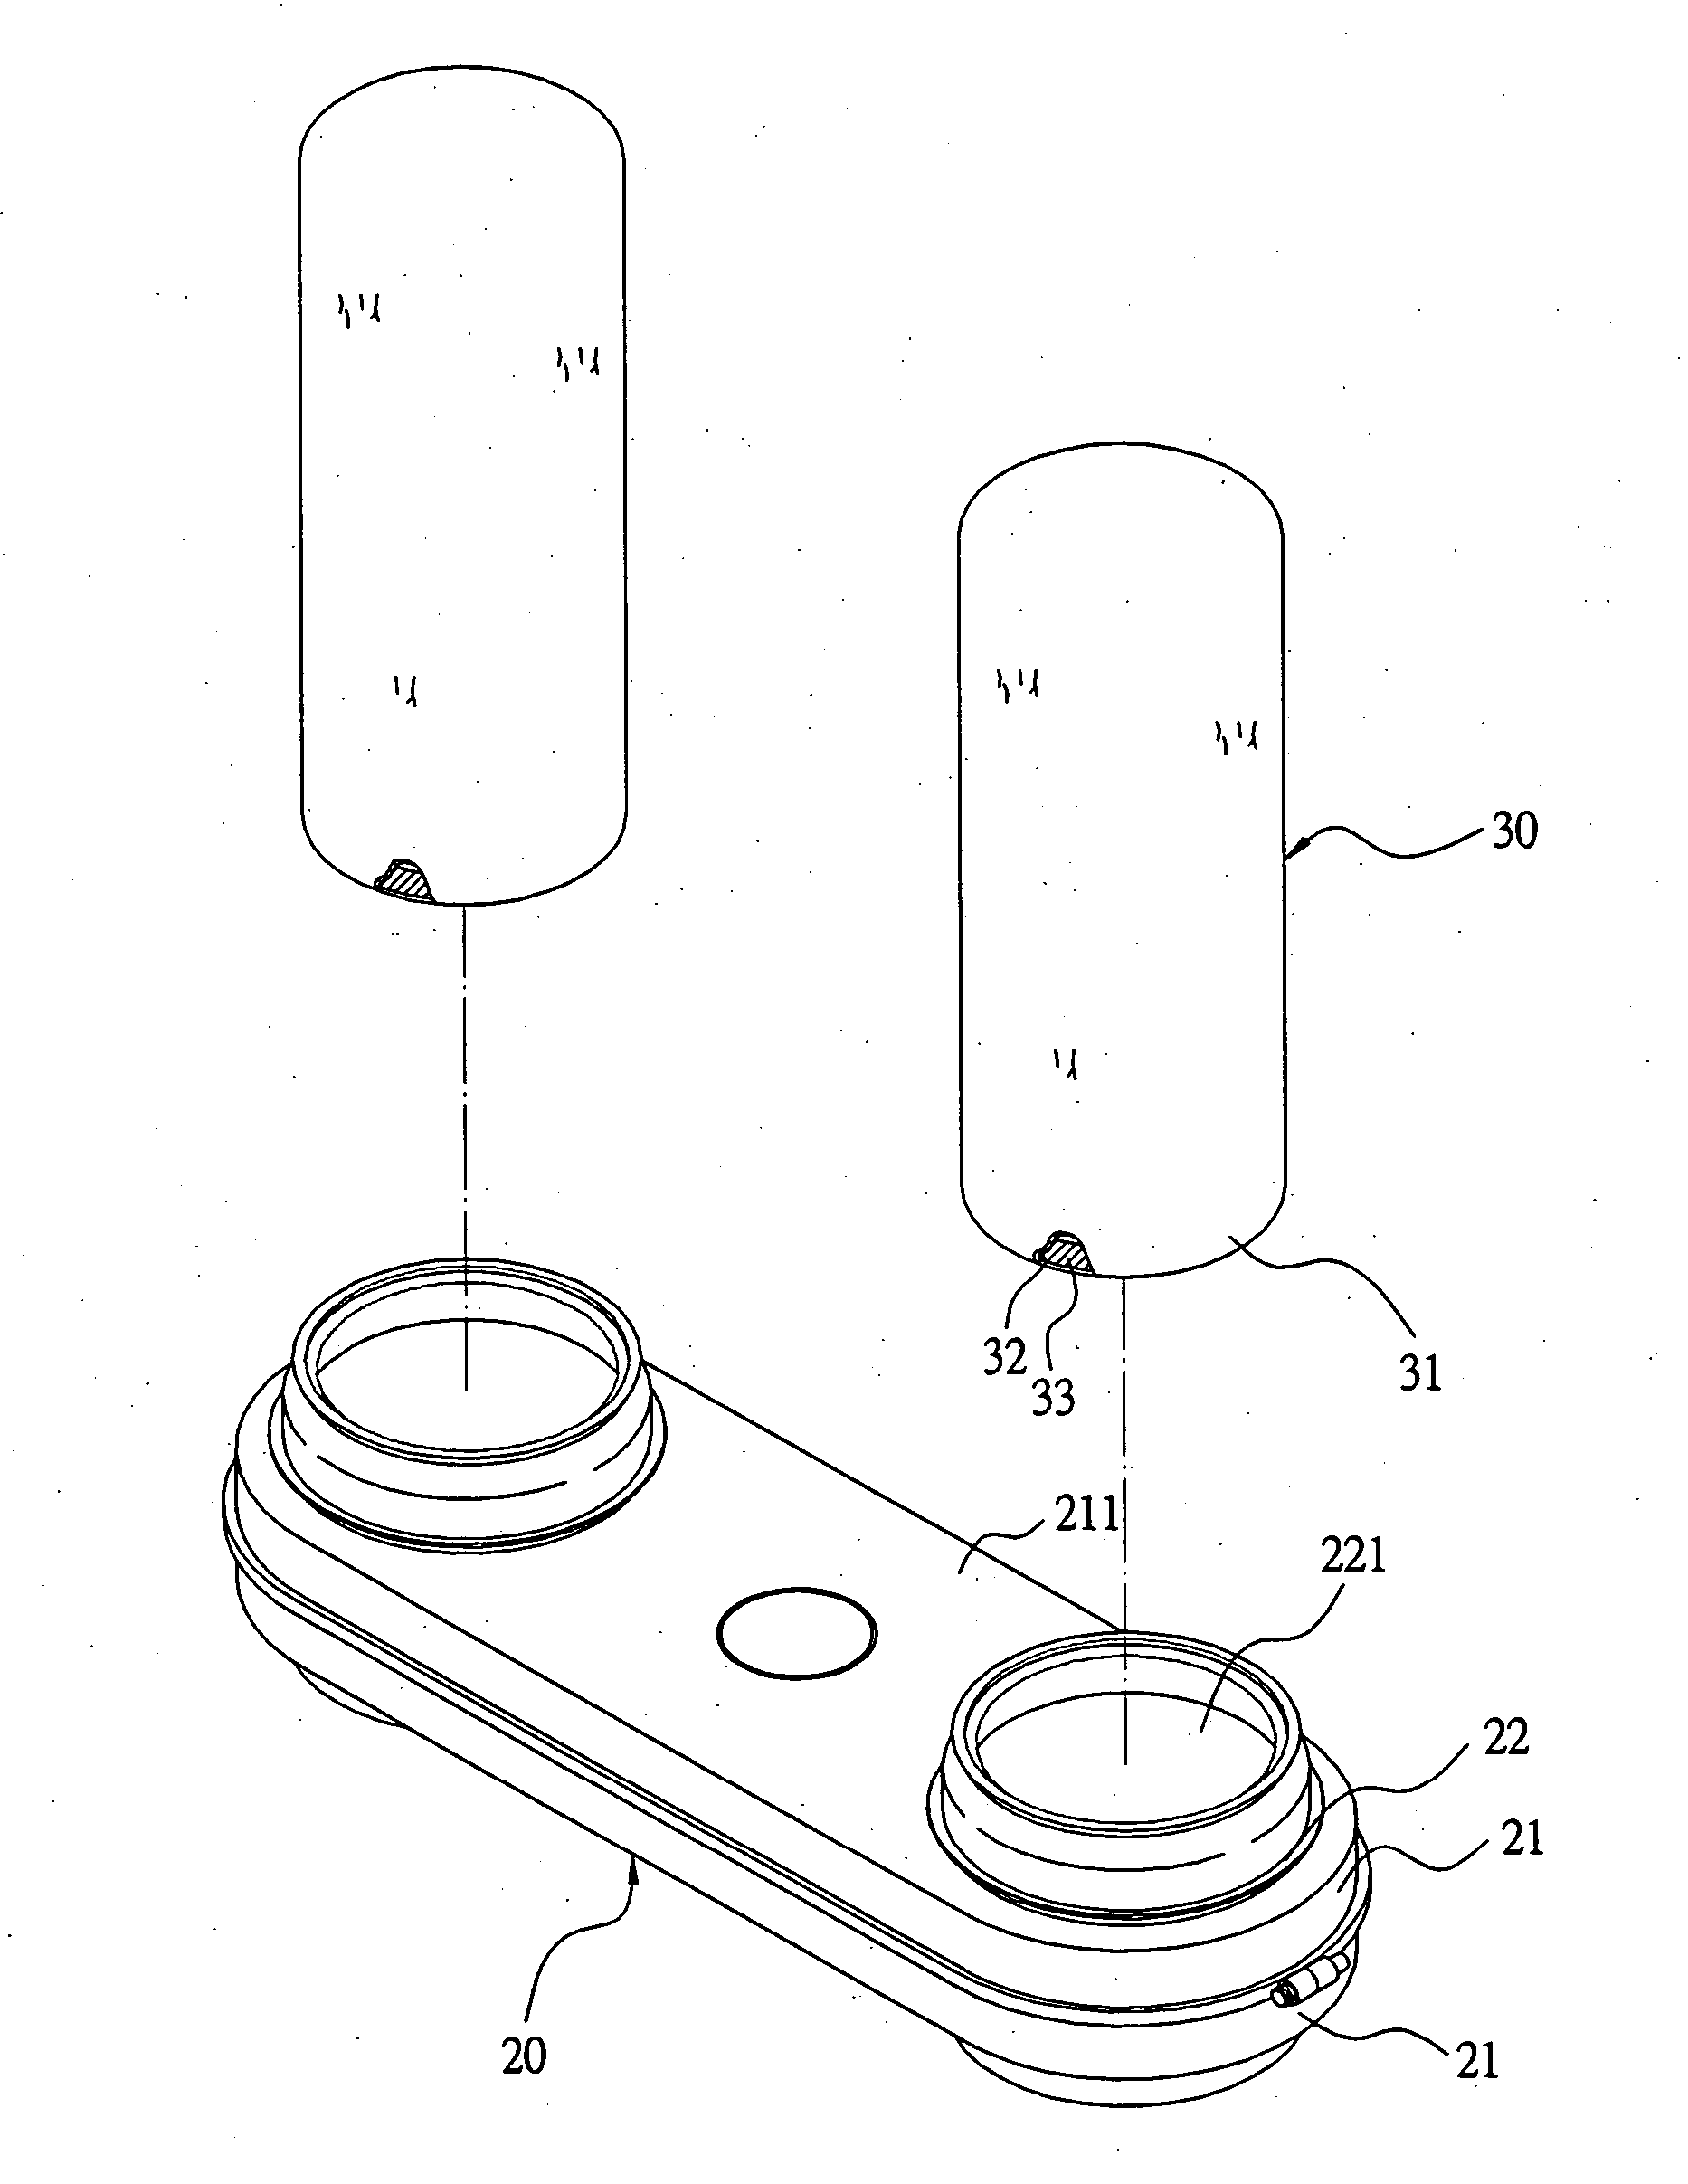 Device for fixing a dust-collecting bag on a dust-collecting machine